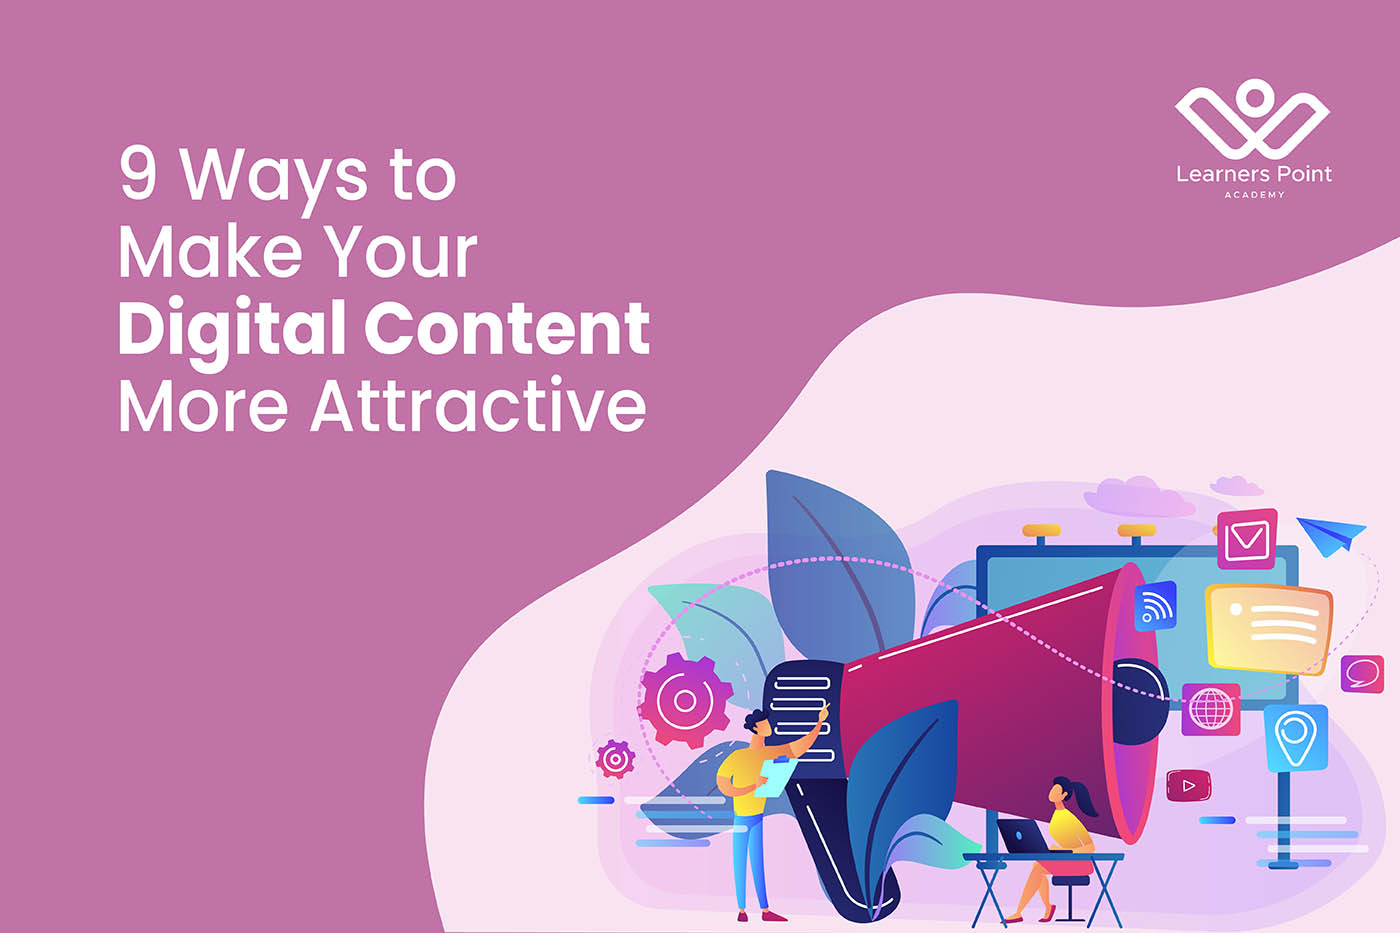 9 Ways to Make Your Digital Content More Attractive